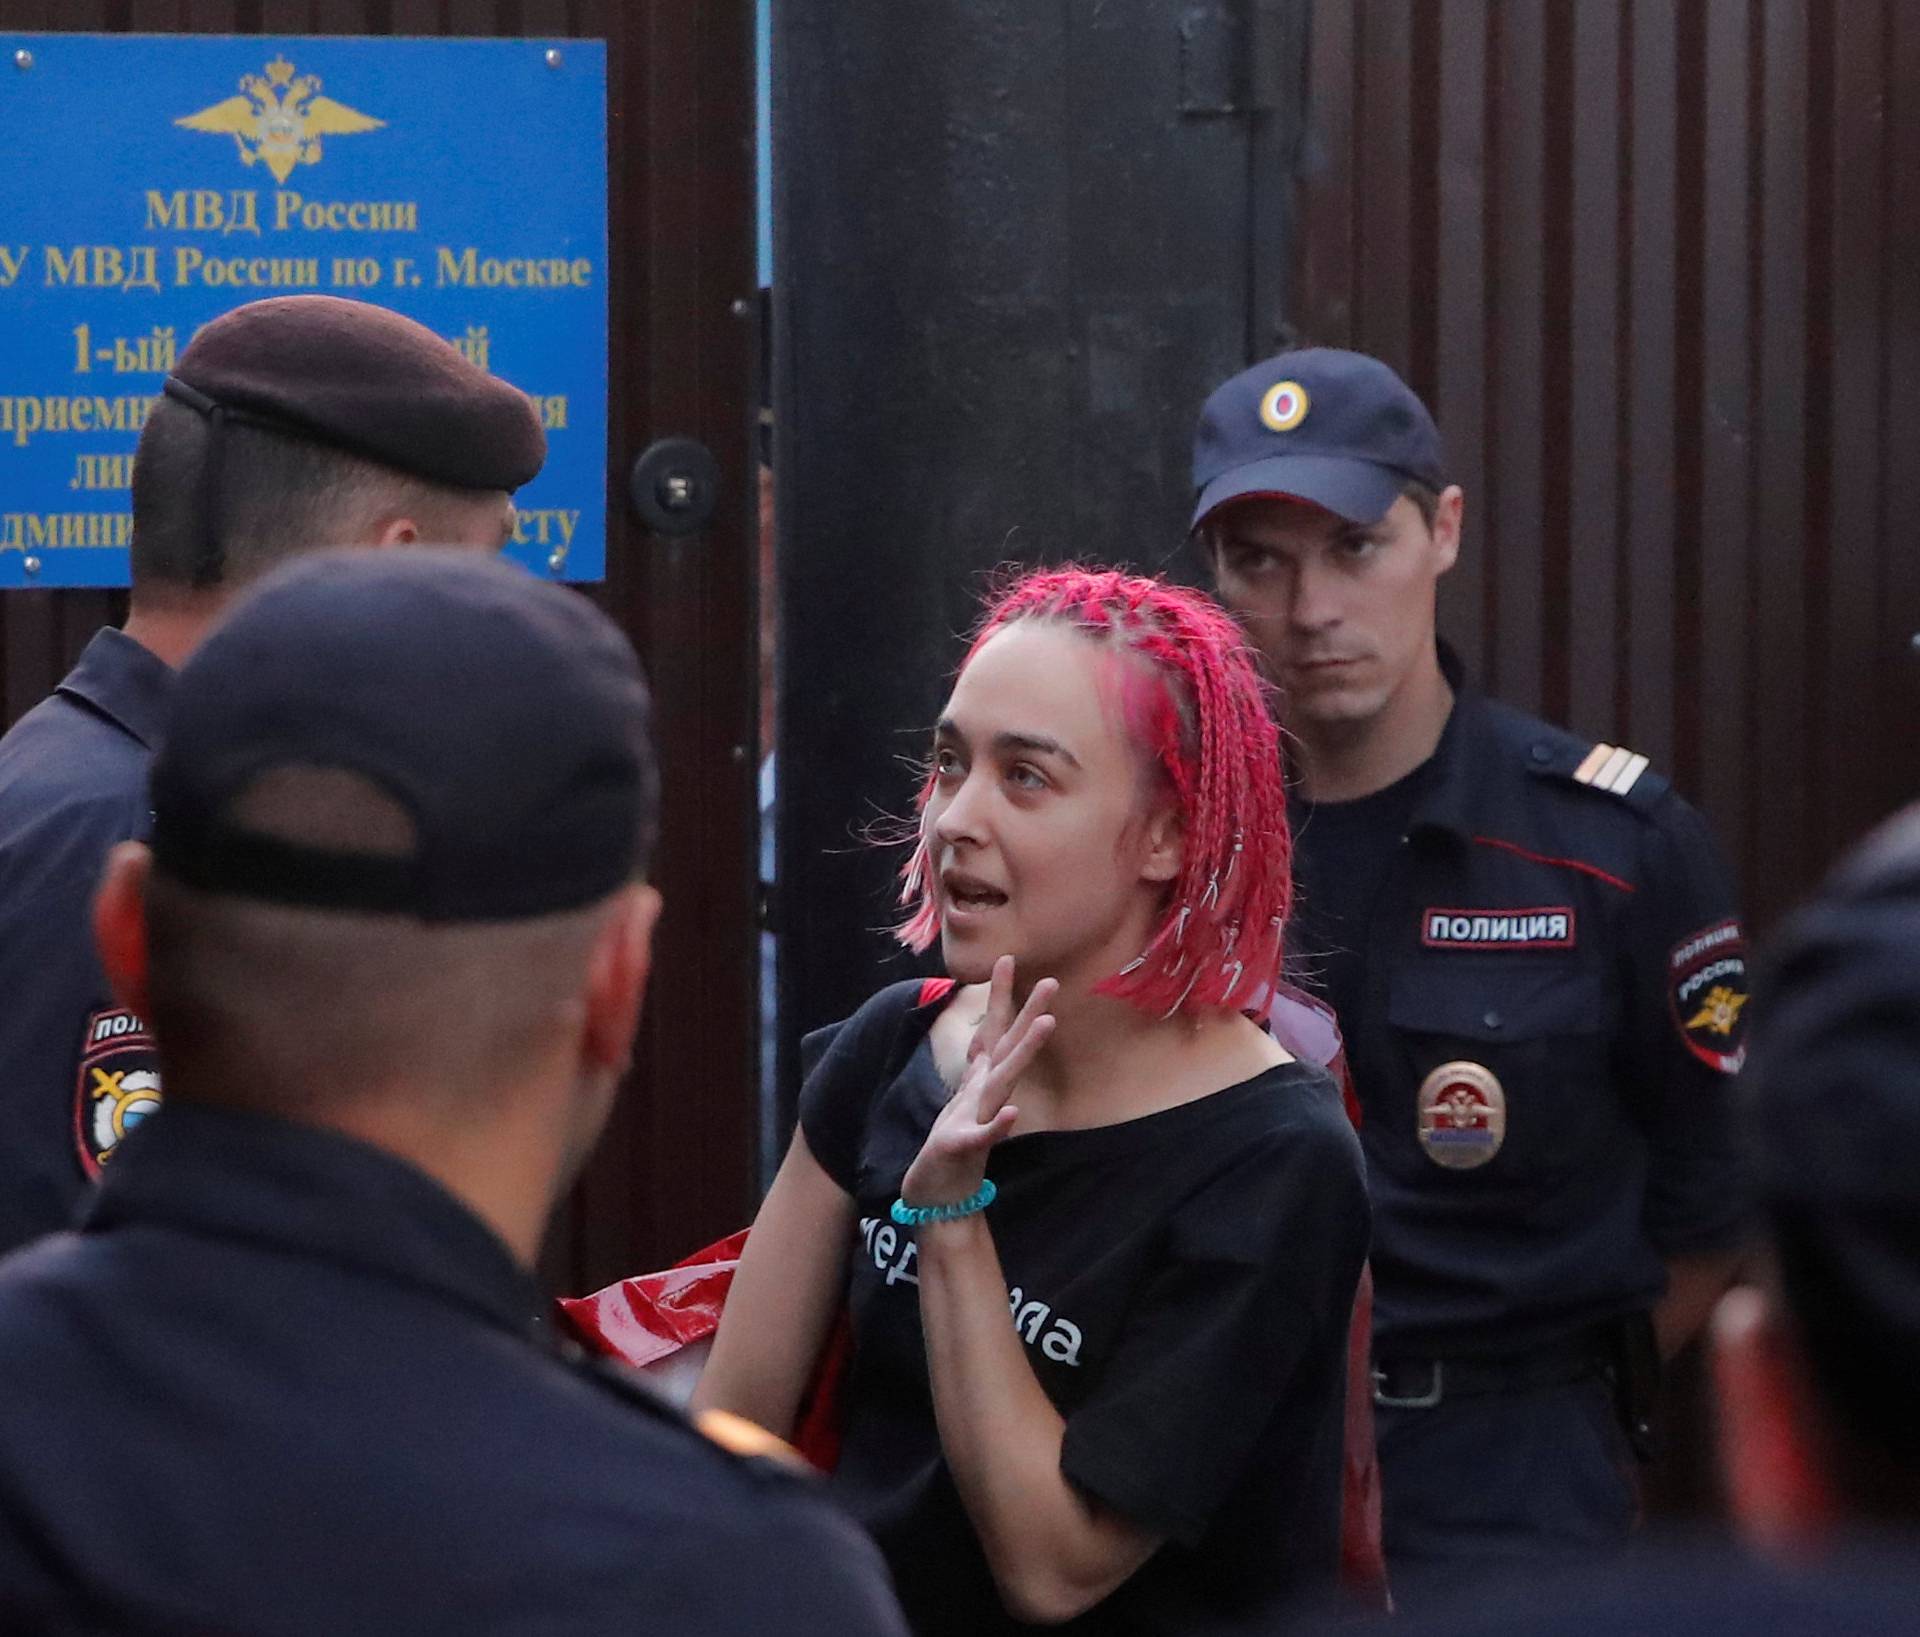 One of four intruders affiliated to anti-Kremlin punk band Pussy Riot, Kurachyova, who ran onto the pitch during the World Cup final between France and Croatia, talks to police officers after leaving 15-day jail outside a detention center in Moscow